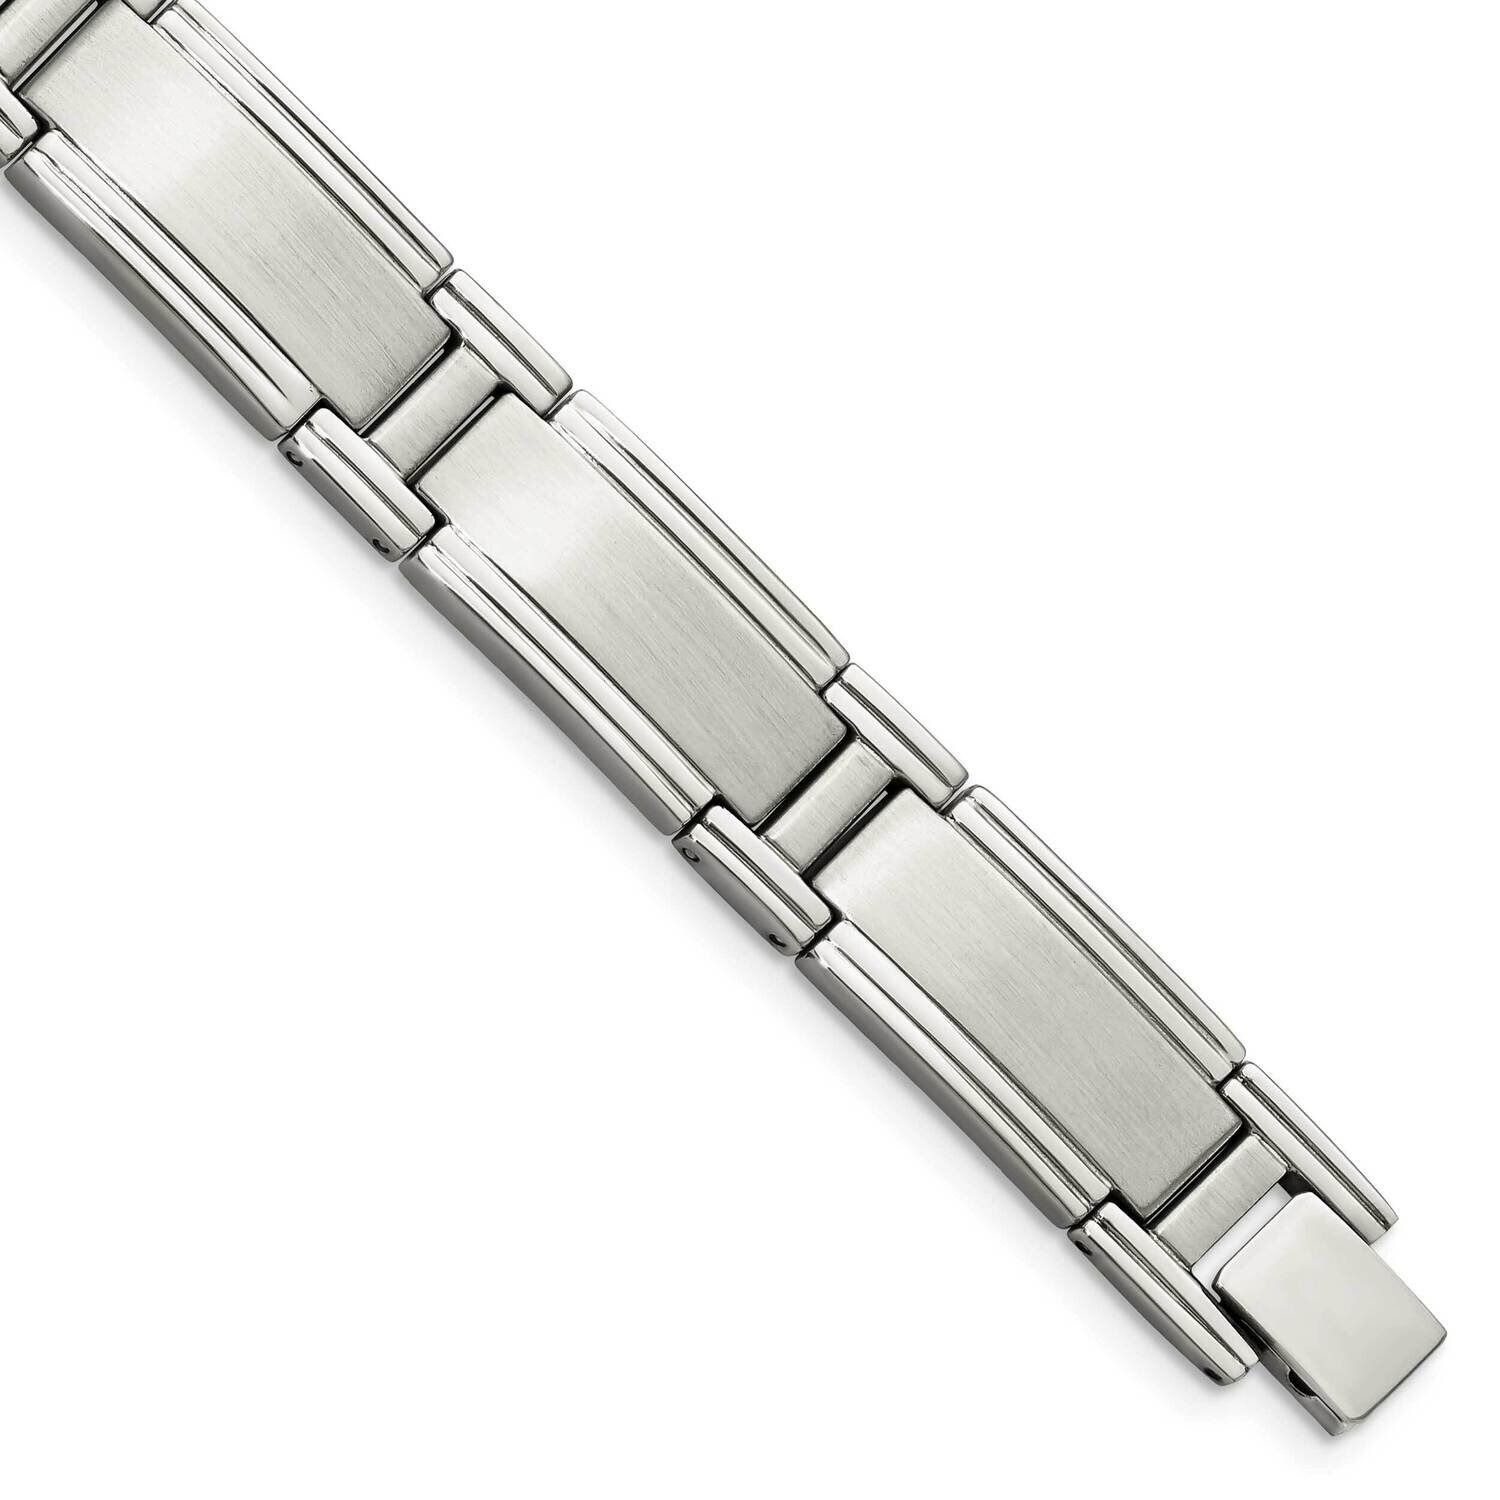 9.25 Inch Bracelet Stainless Steel Brushed and Polished SRB113-9.5